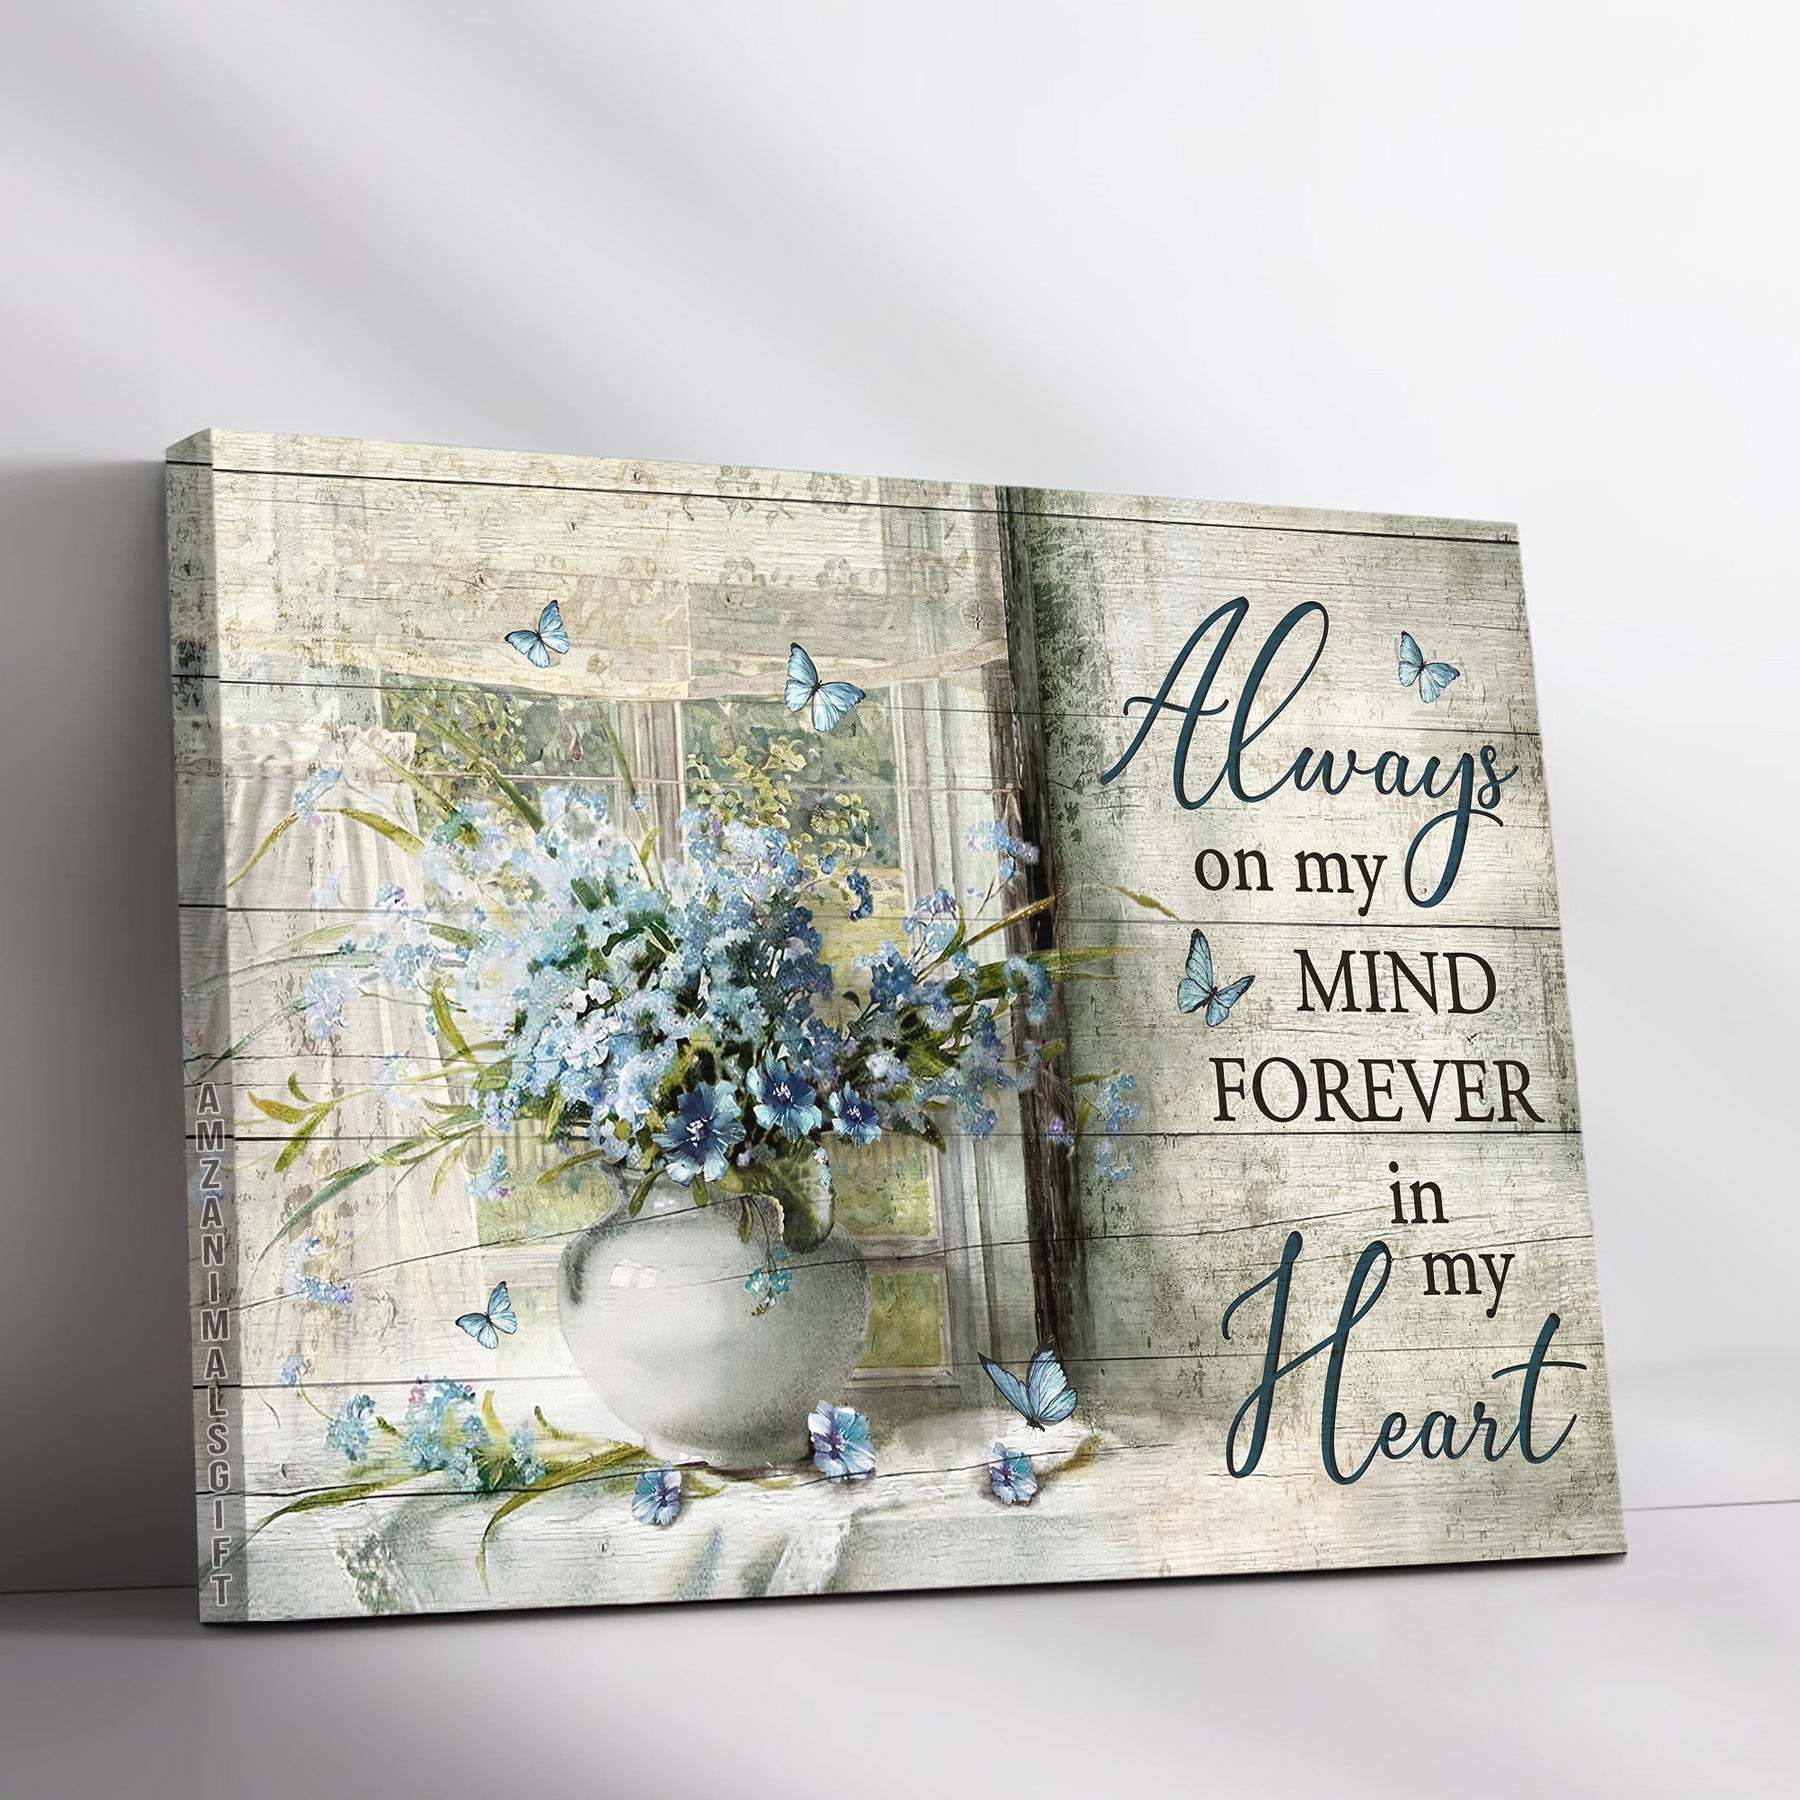 Memorial Premium Wrapped Landscape Canvas - Blue Flower, Blue Butterfly, Window Frame, Always On My Mind - Heaven Gift For Members Family